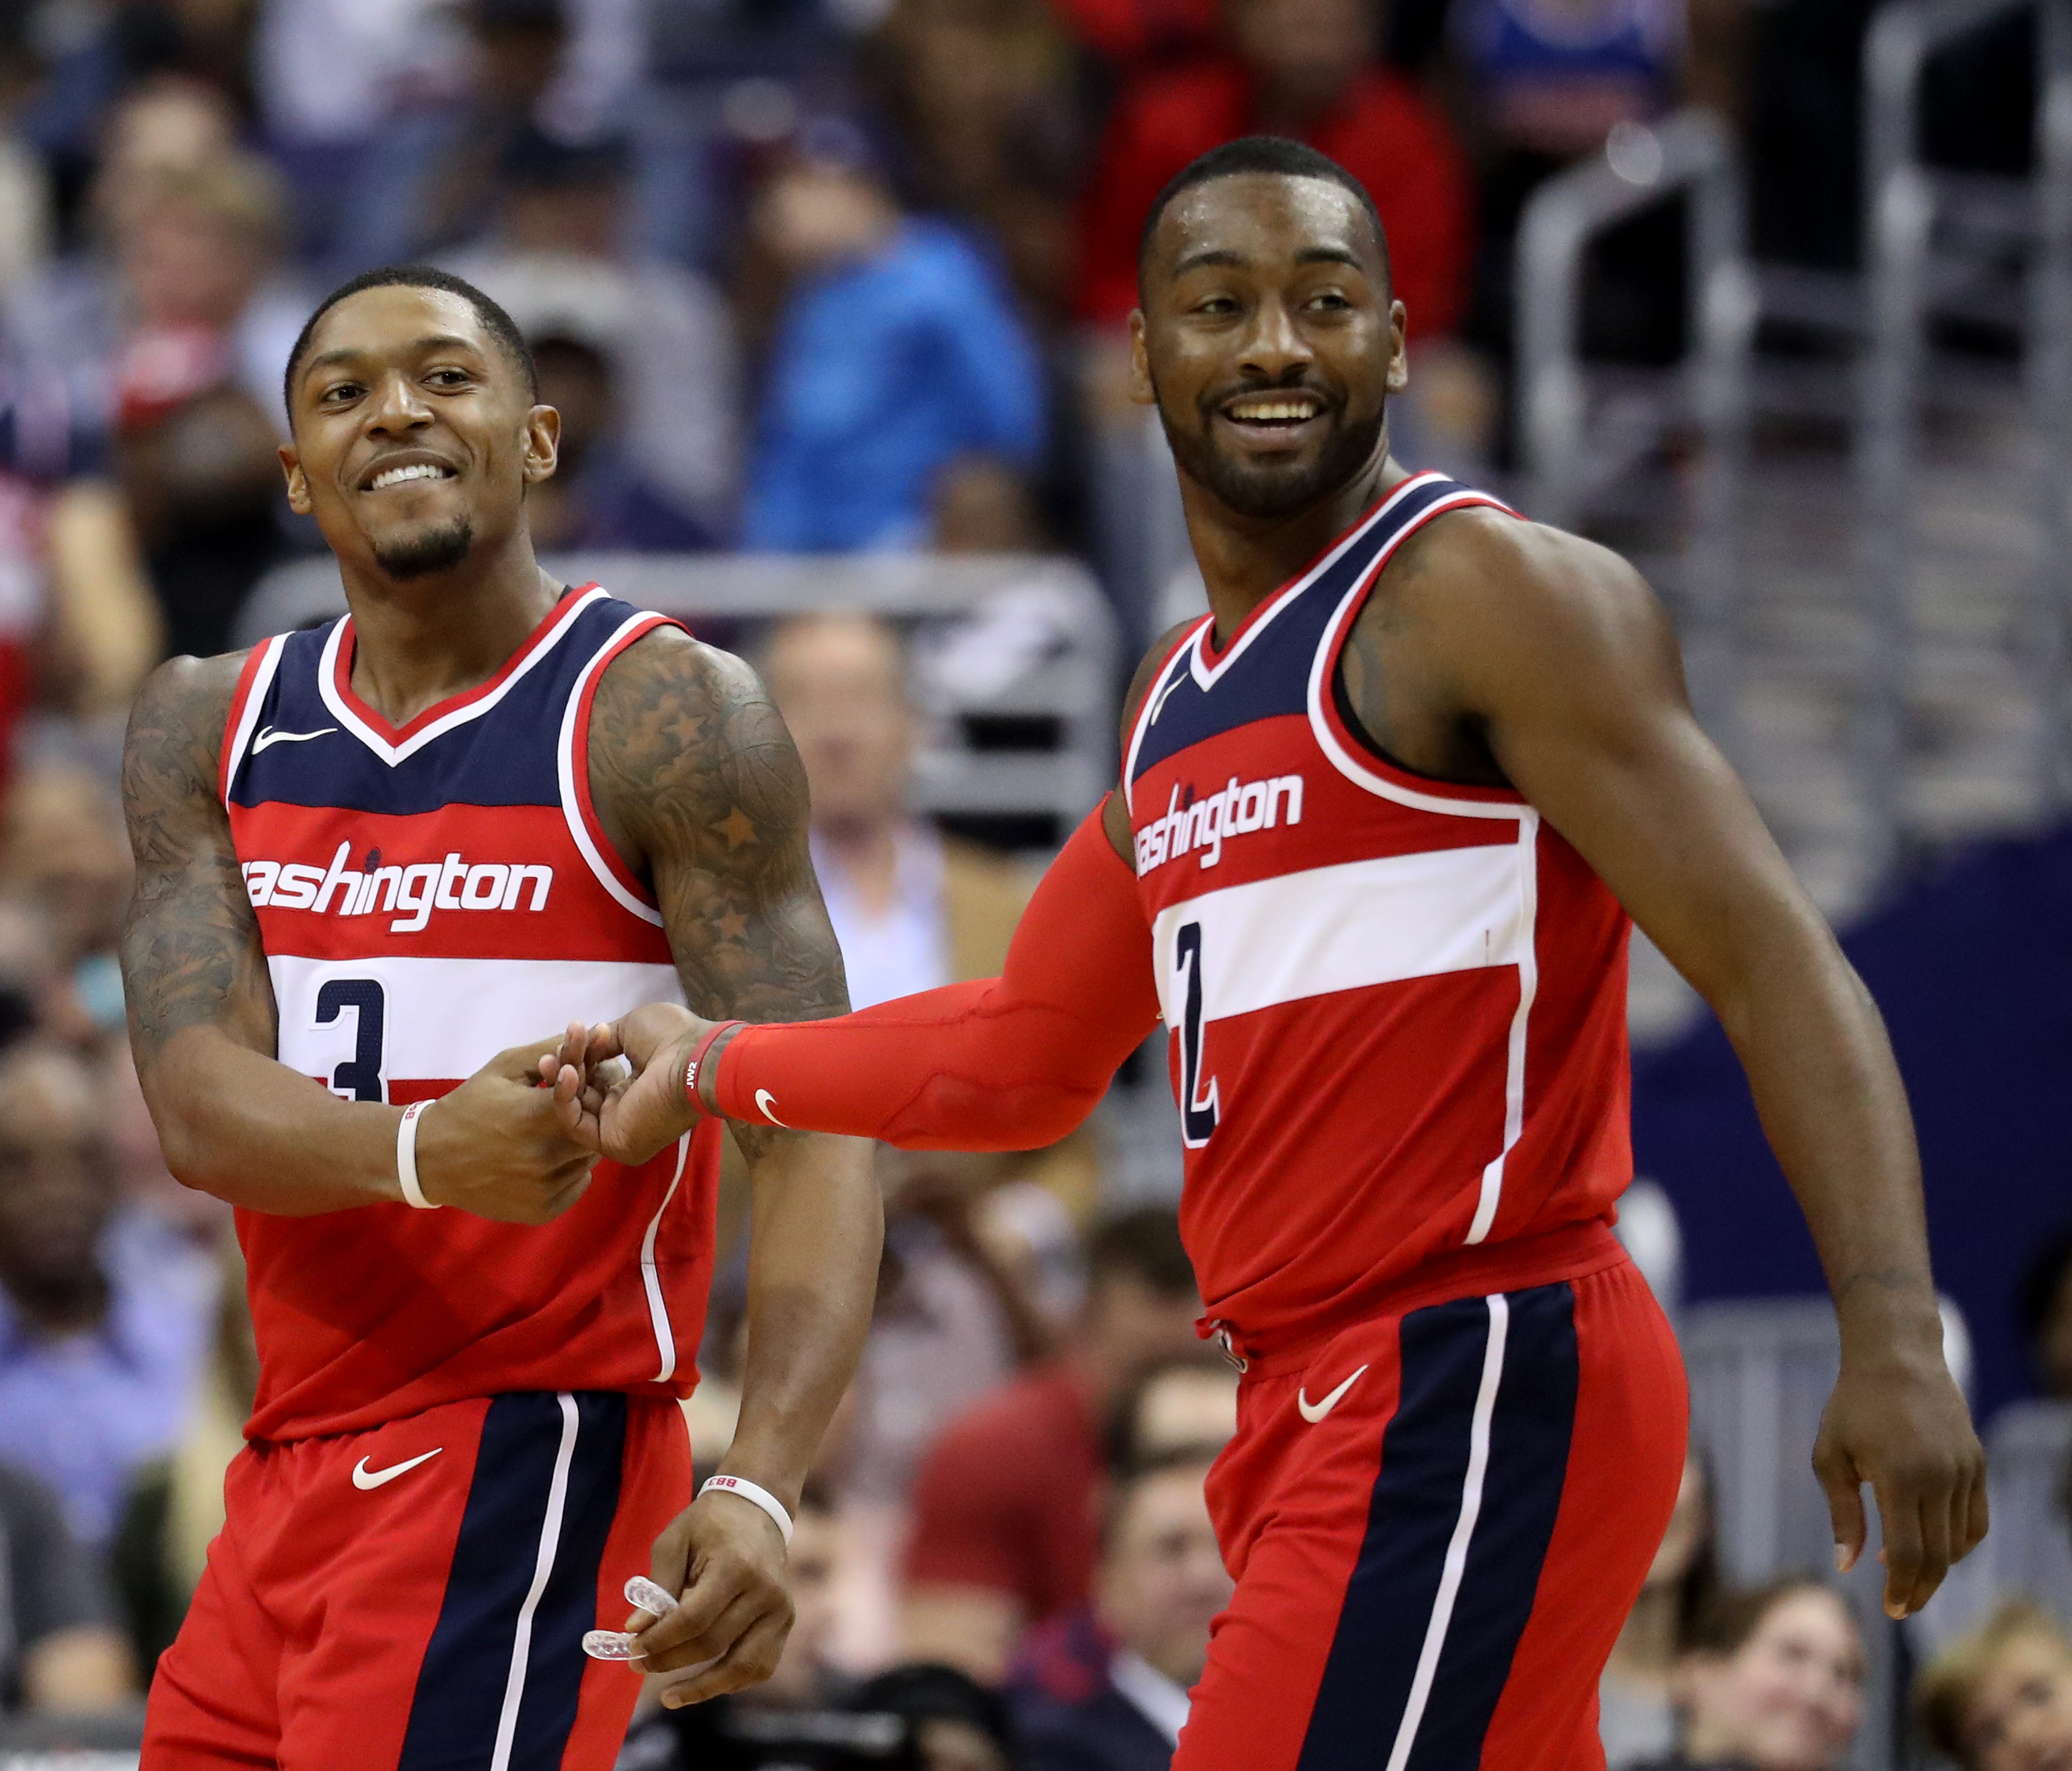 Bradley Beal and John Wall of the Washington Wizards celebrate in the second half against the Detroit Pistons at Capital One Arena.